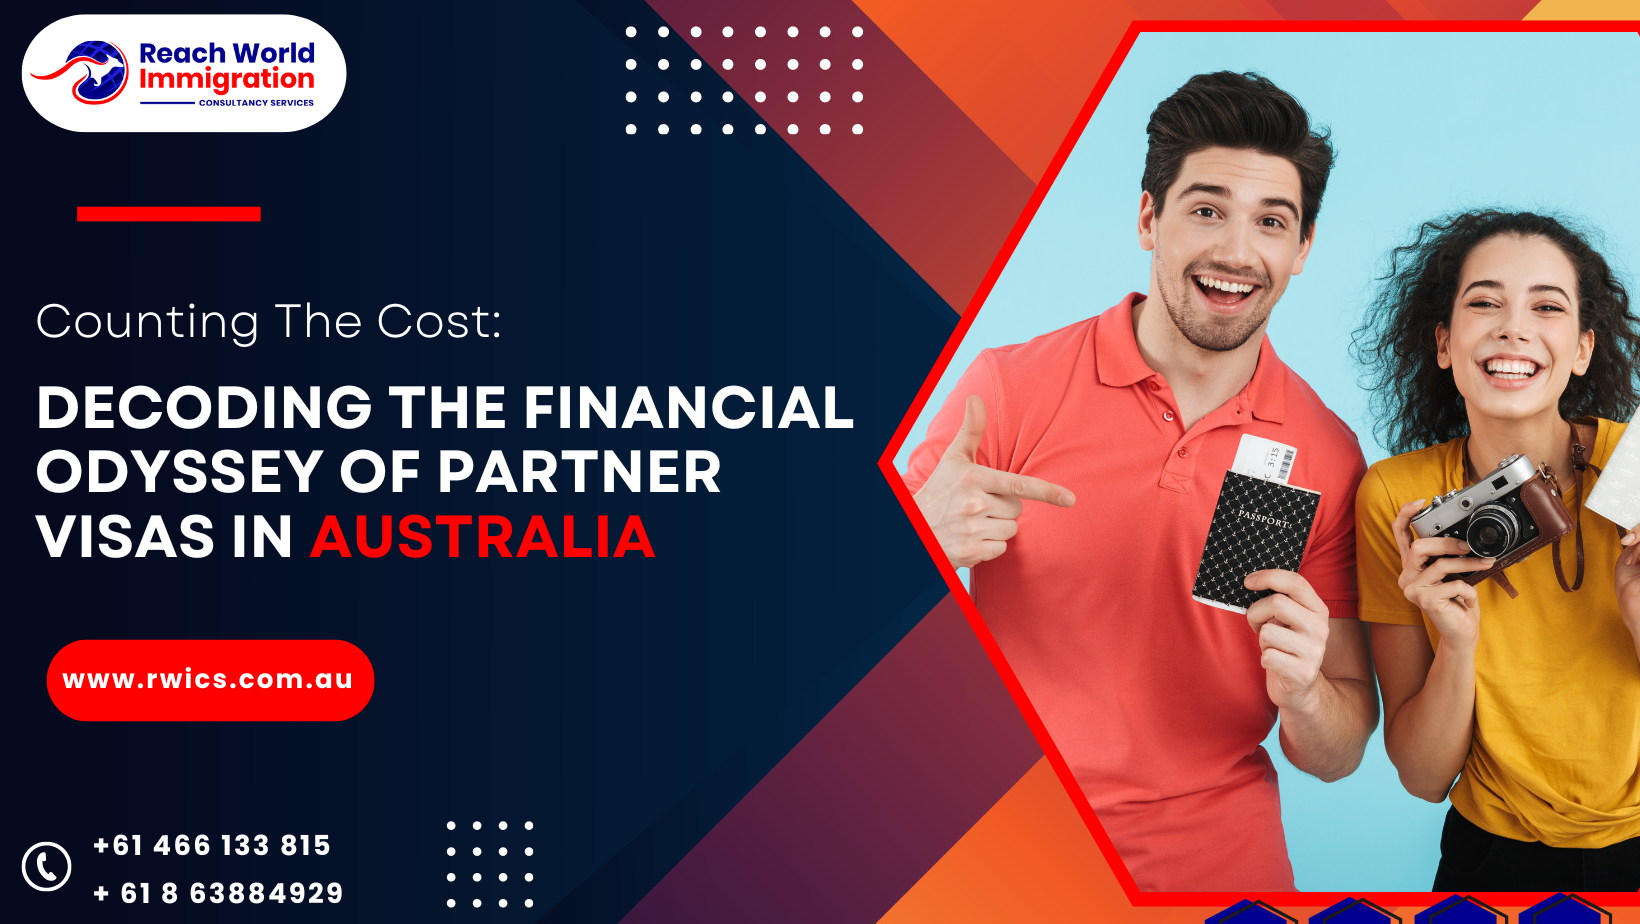 Counting the Costs: Decoding the Financial Odyssey of Partner Visas in Australia